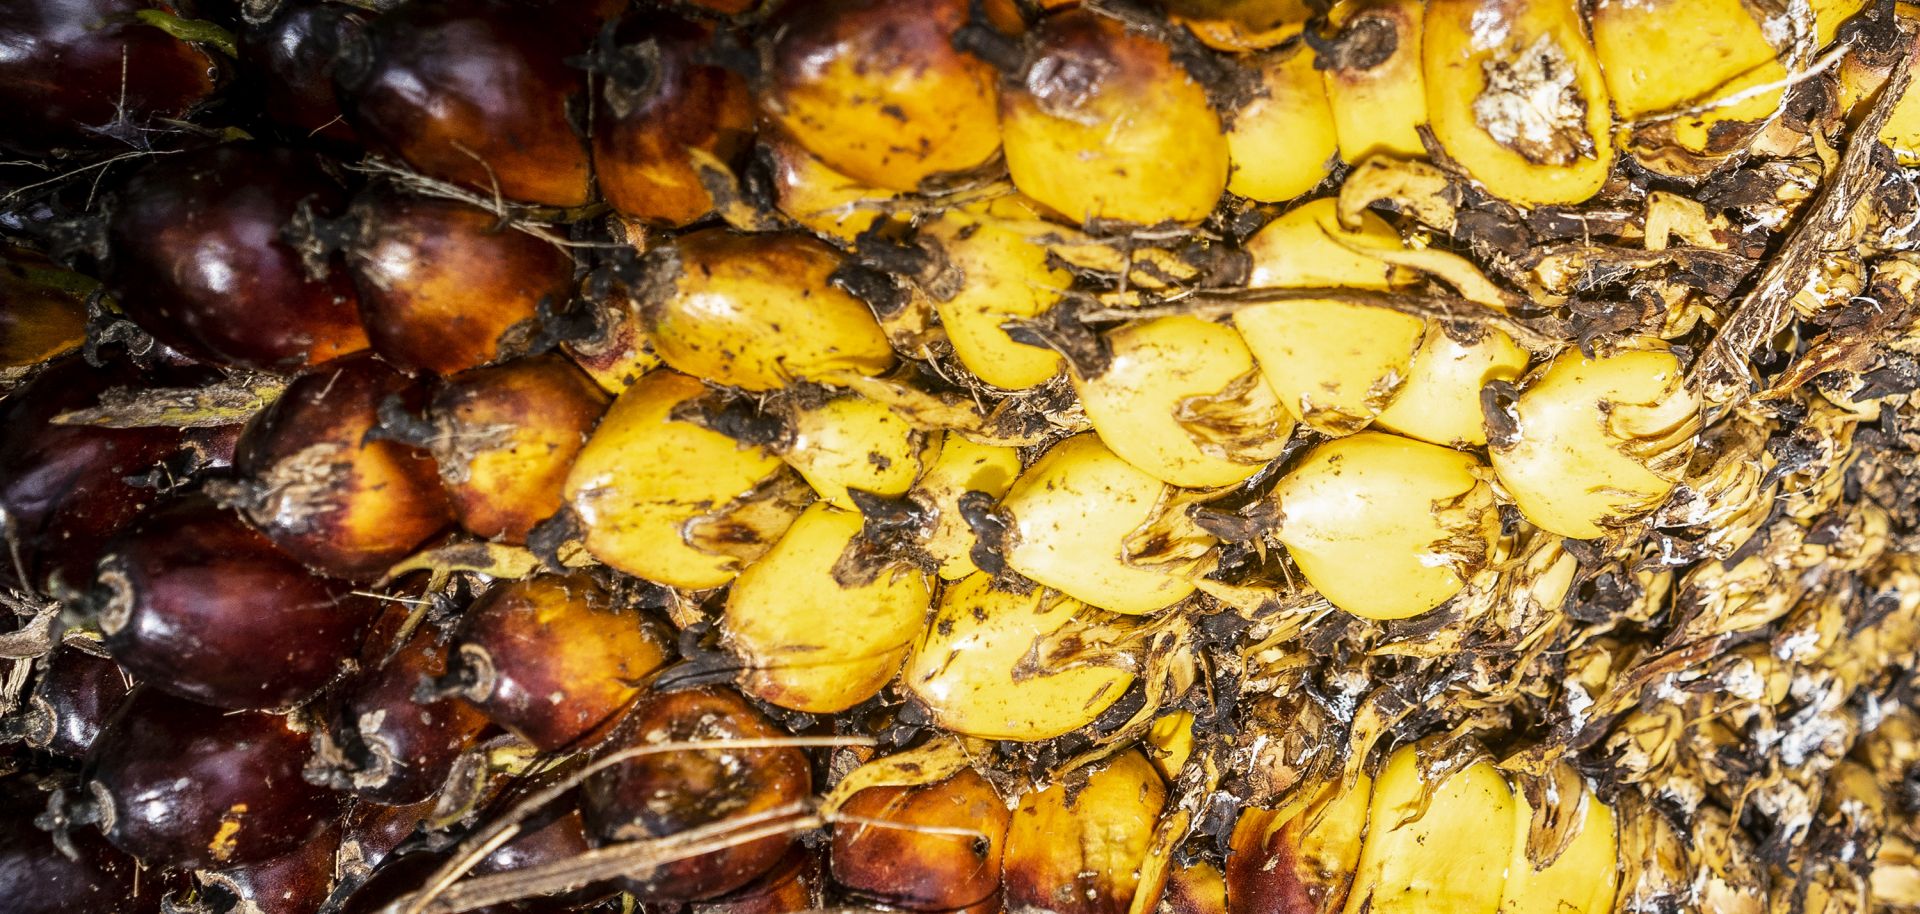 This photo shows palm oil fruit after harvest.